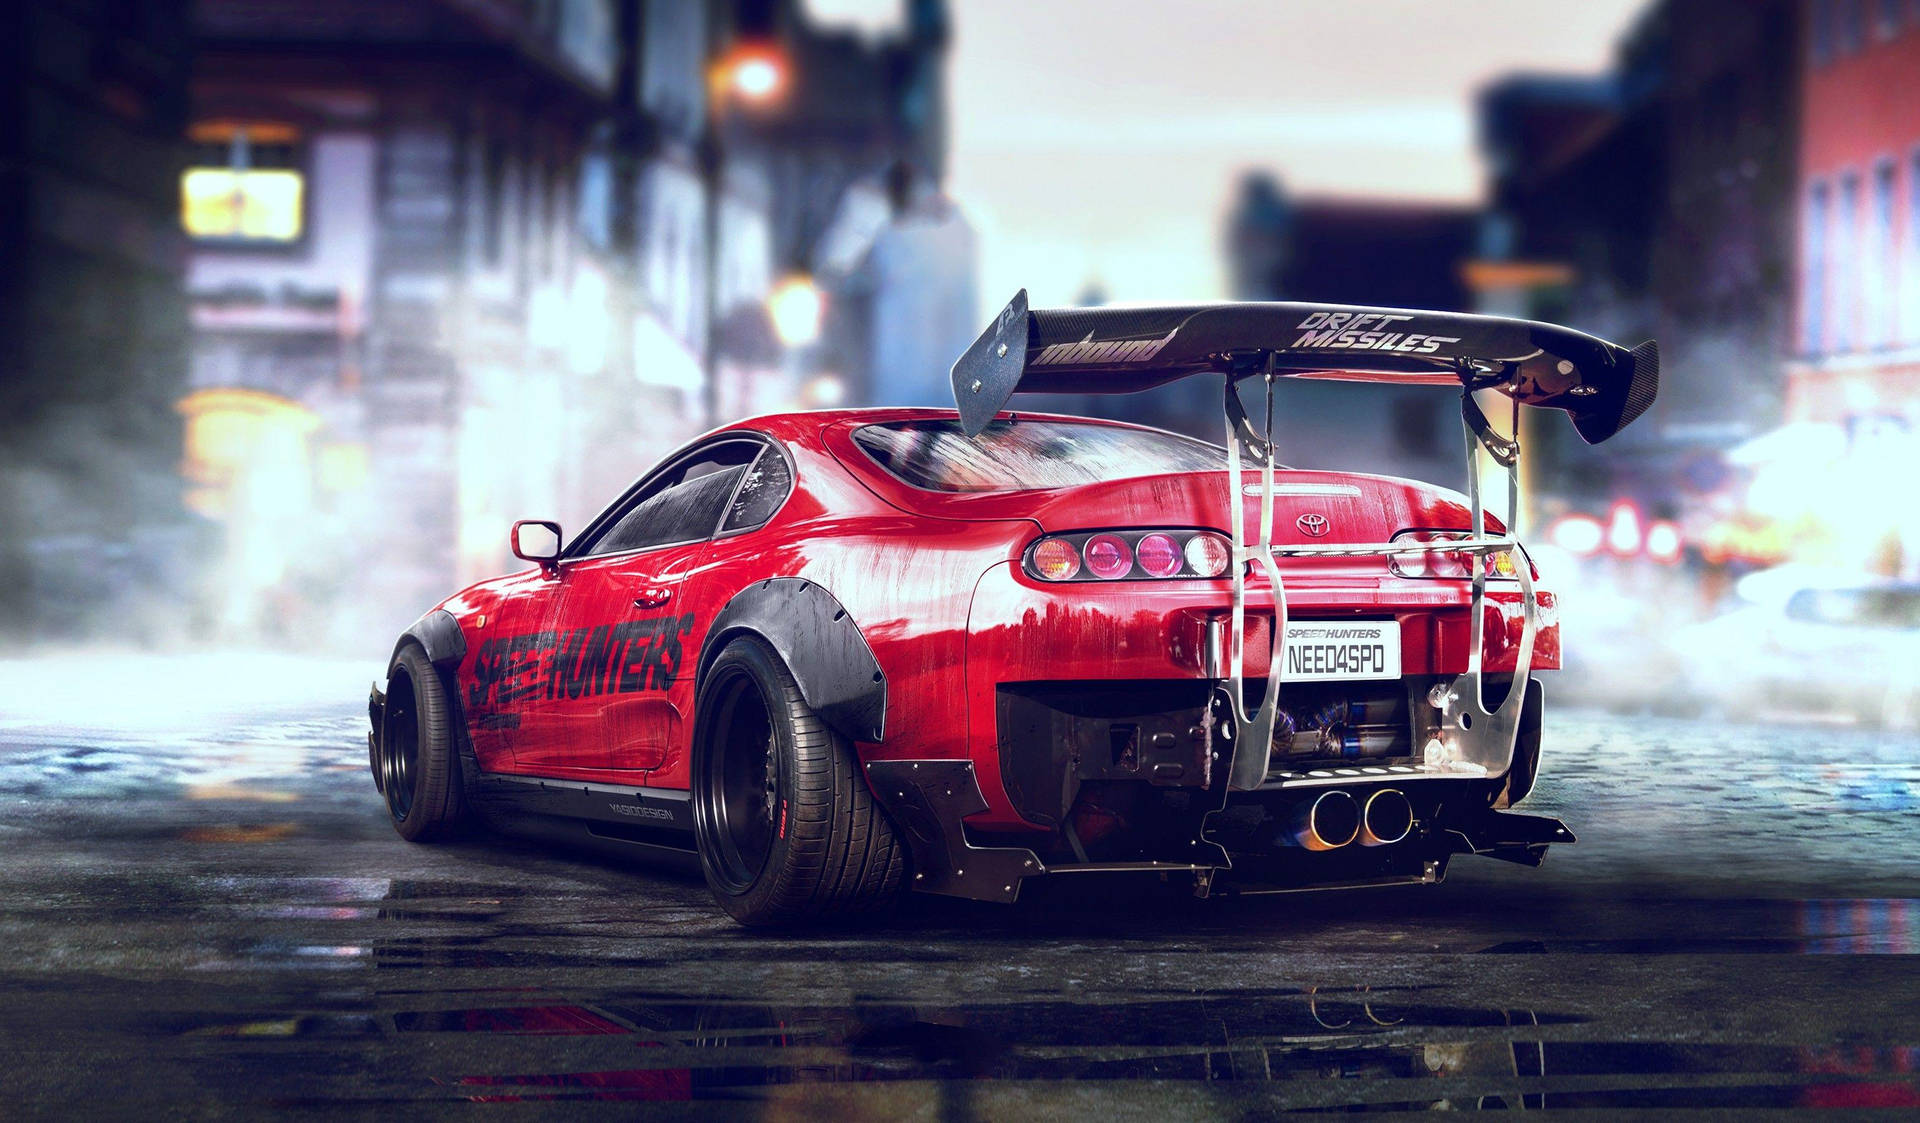 Download Supra wallpaper by PedroDavi27  dc  Free on ZEDGE now Browse  millions of popular forza Wallpapers and Ri  Toyota supra mk4 Luxury  cars Toyota supra